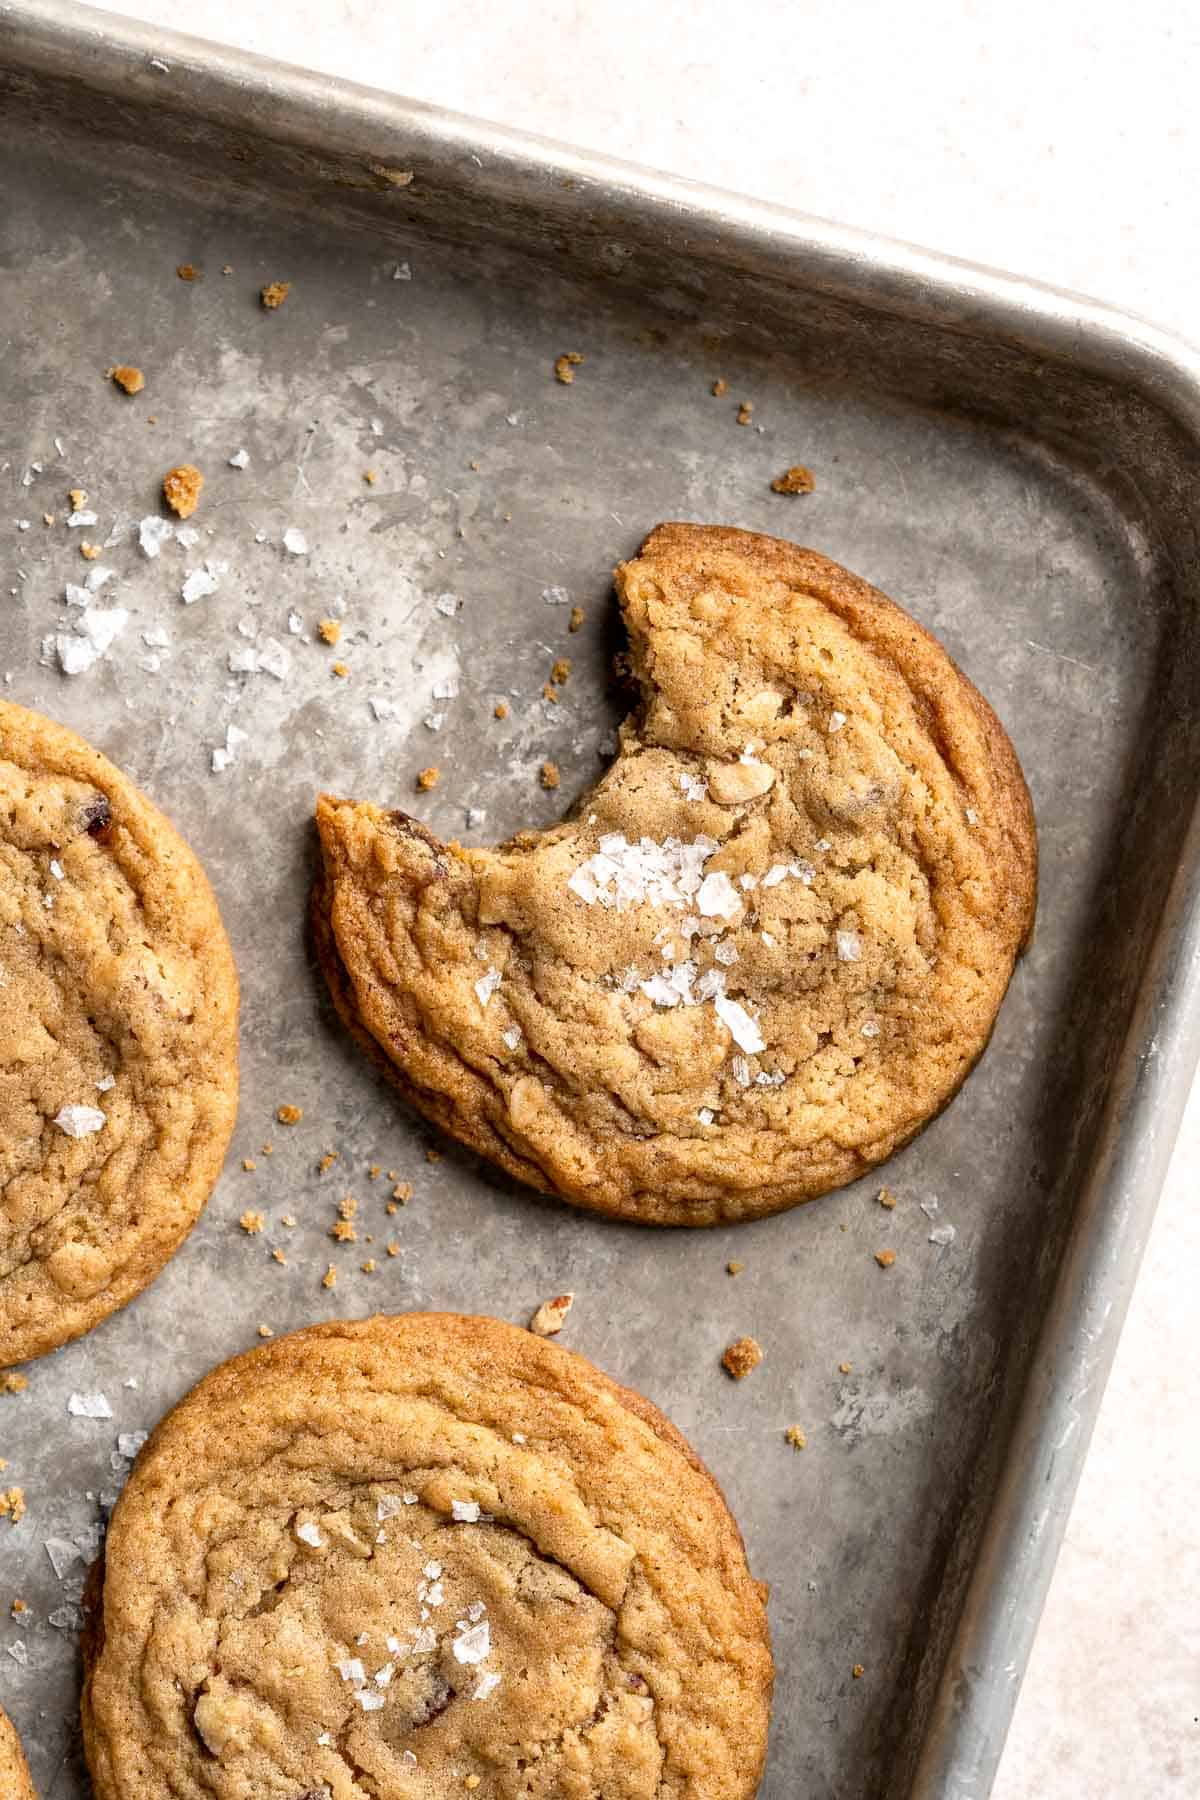 Date Cookies are sweet, soft, and chewy with a rich caramel-like flavor from dates and a touch of crunch from walnuts. They are rich and buttery good! | aheadofthyme.com